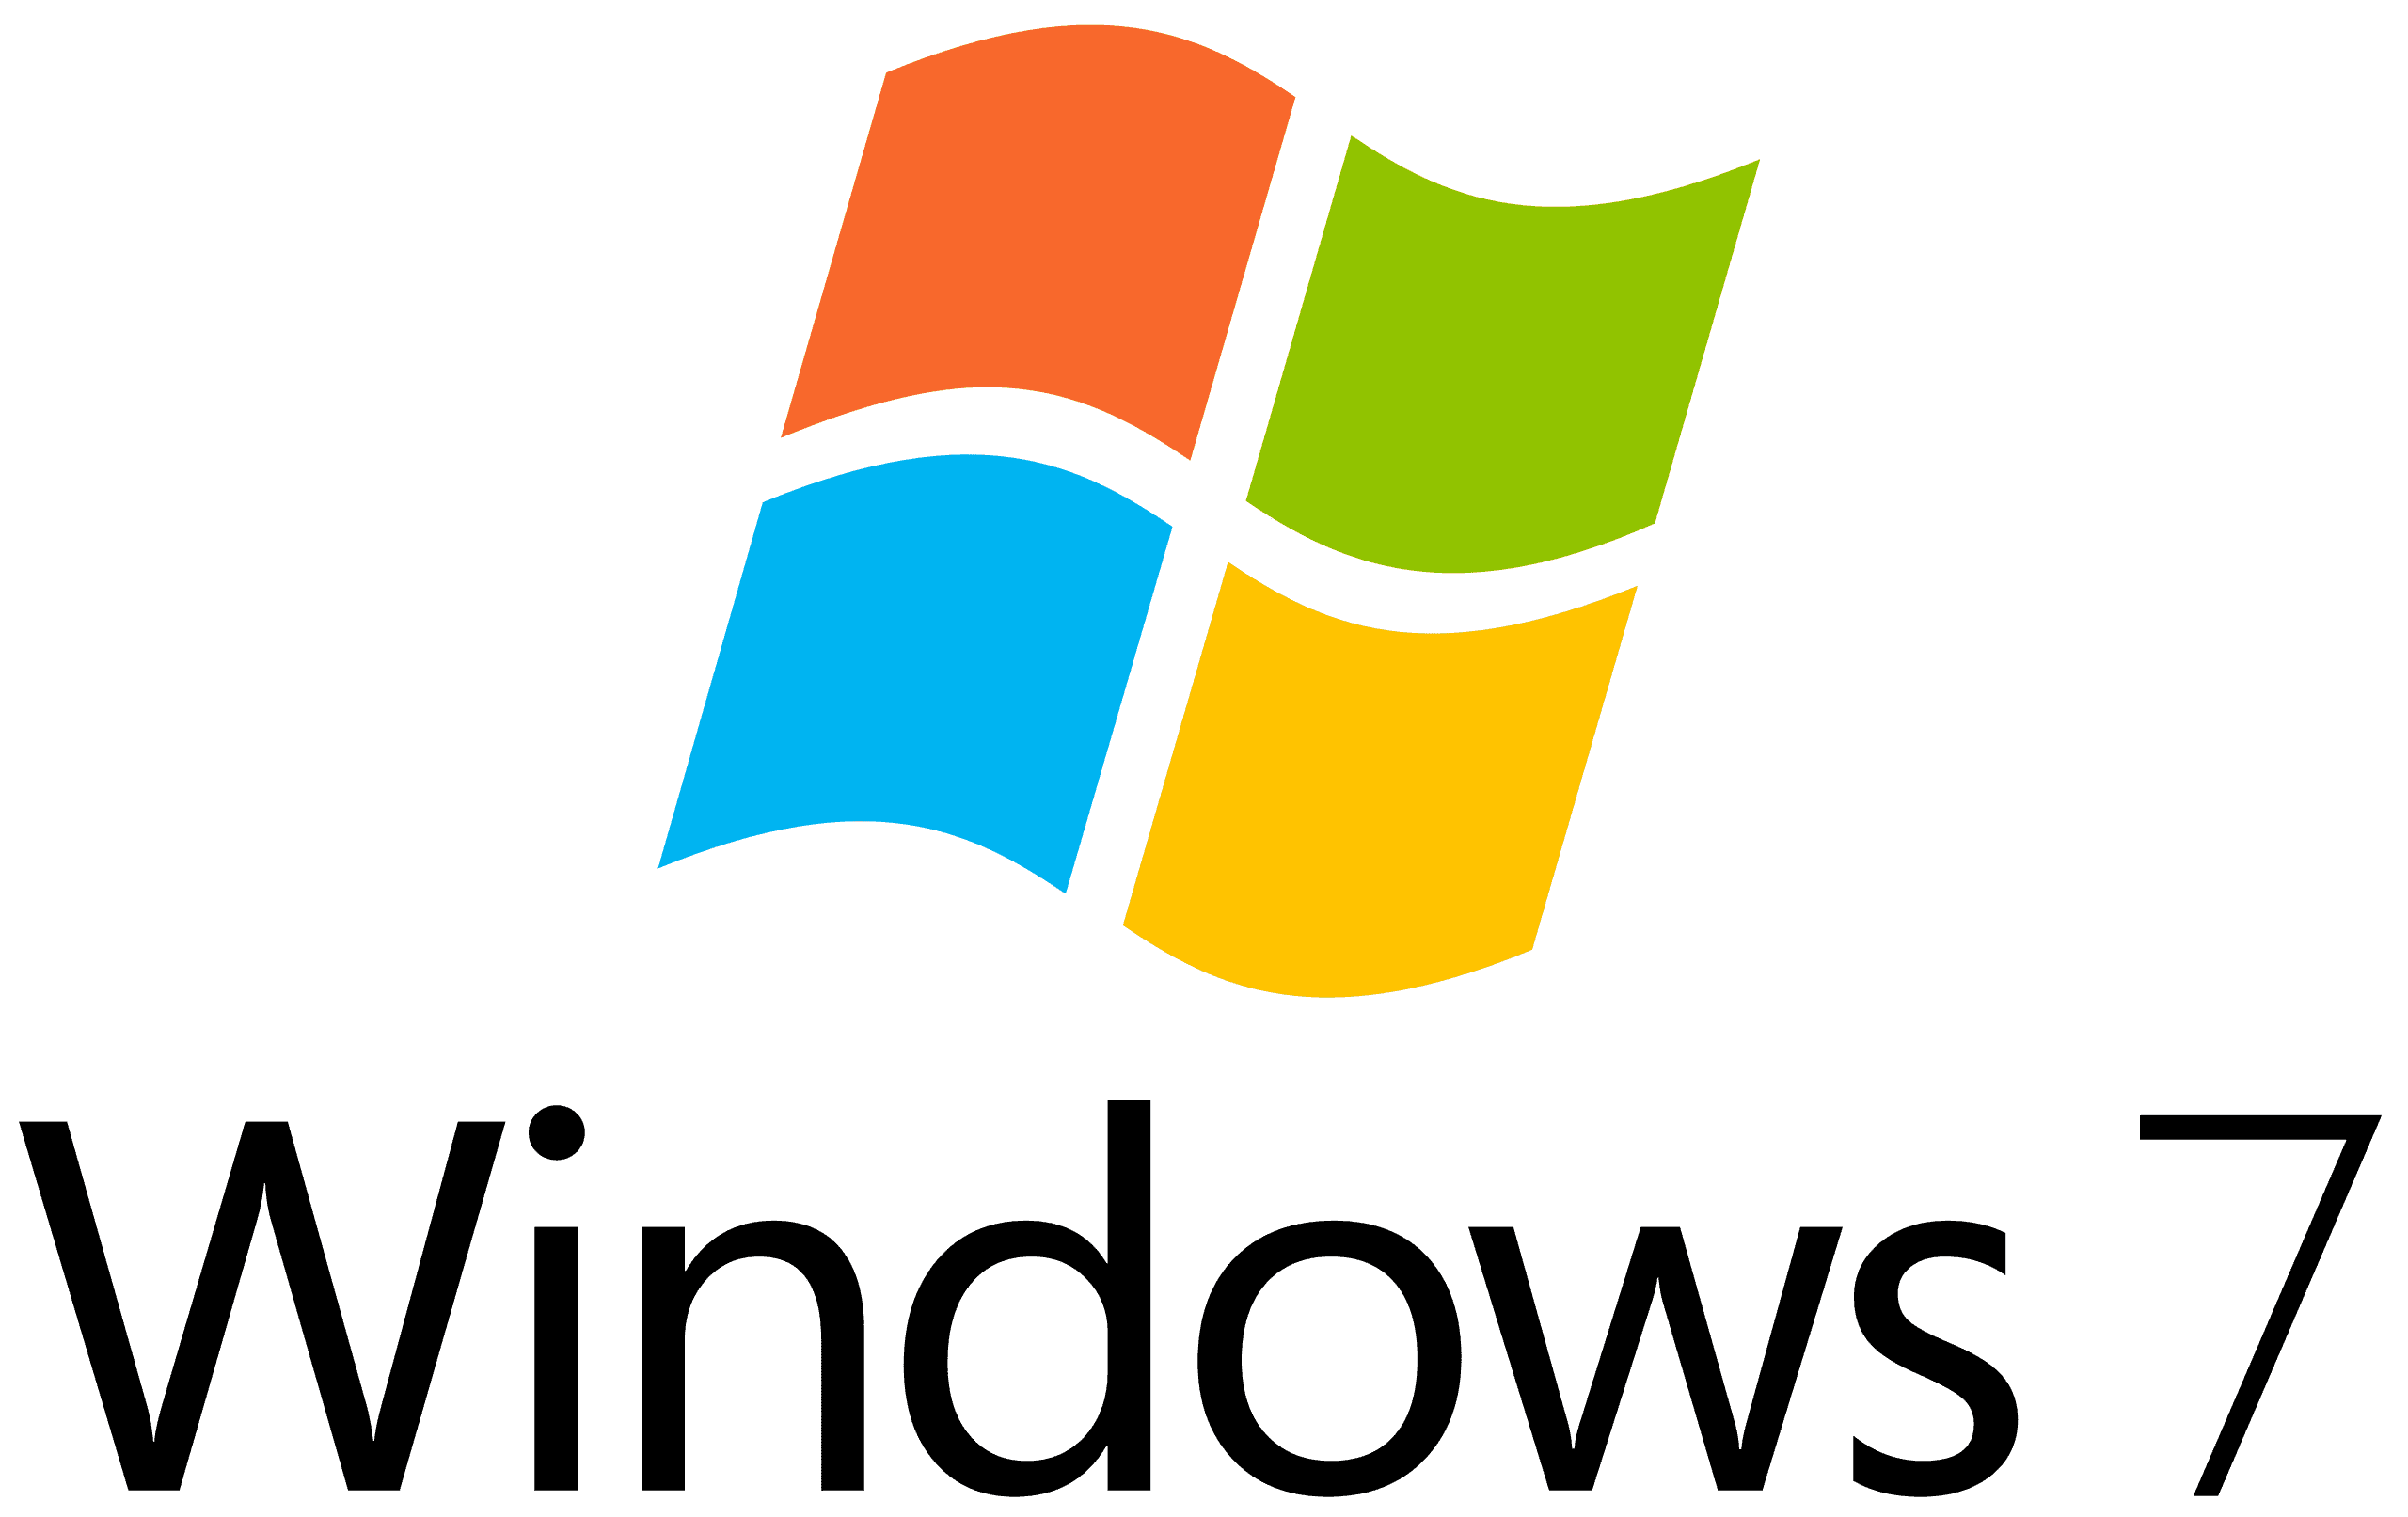 Microsoft is ending Windows 7 extended security updates this Tuesday